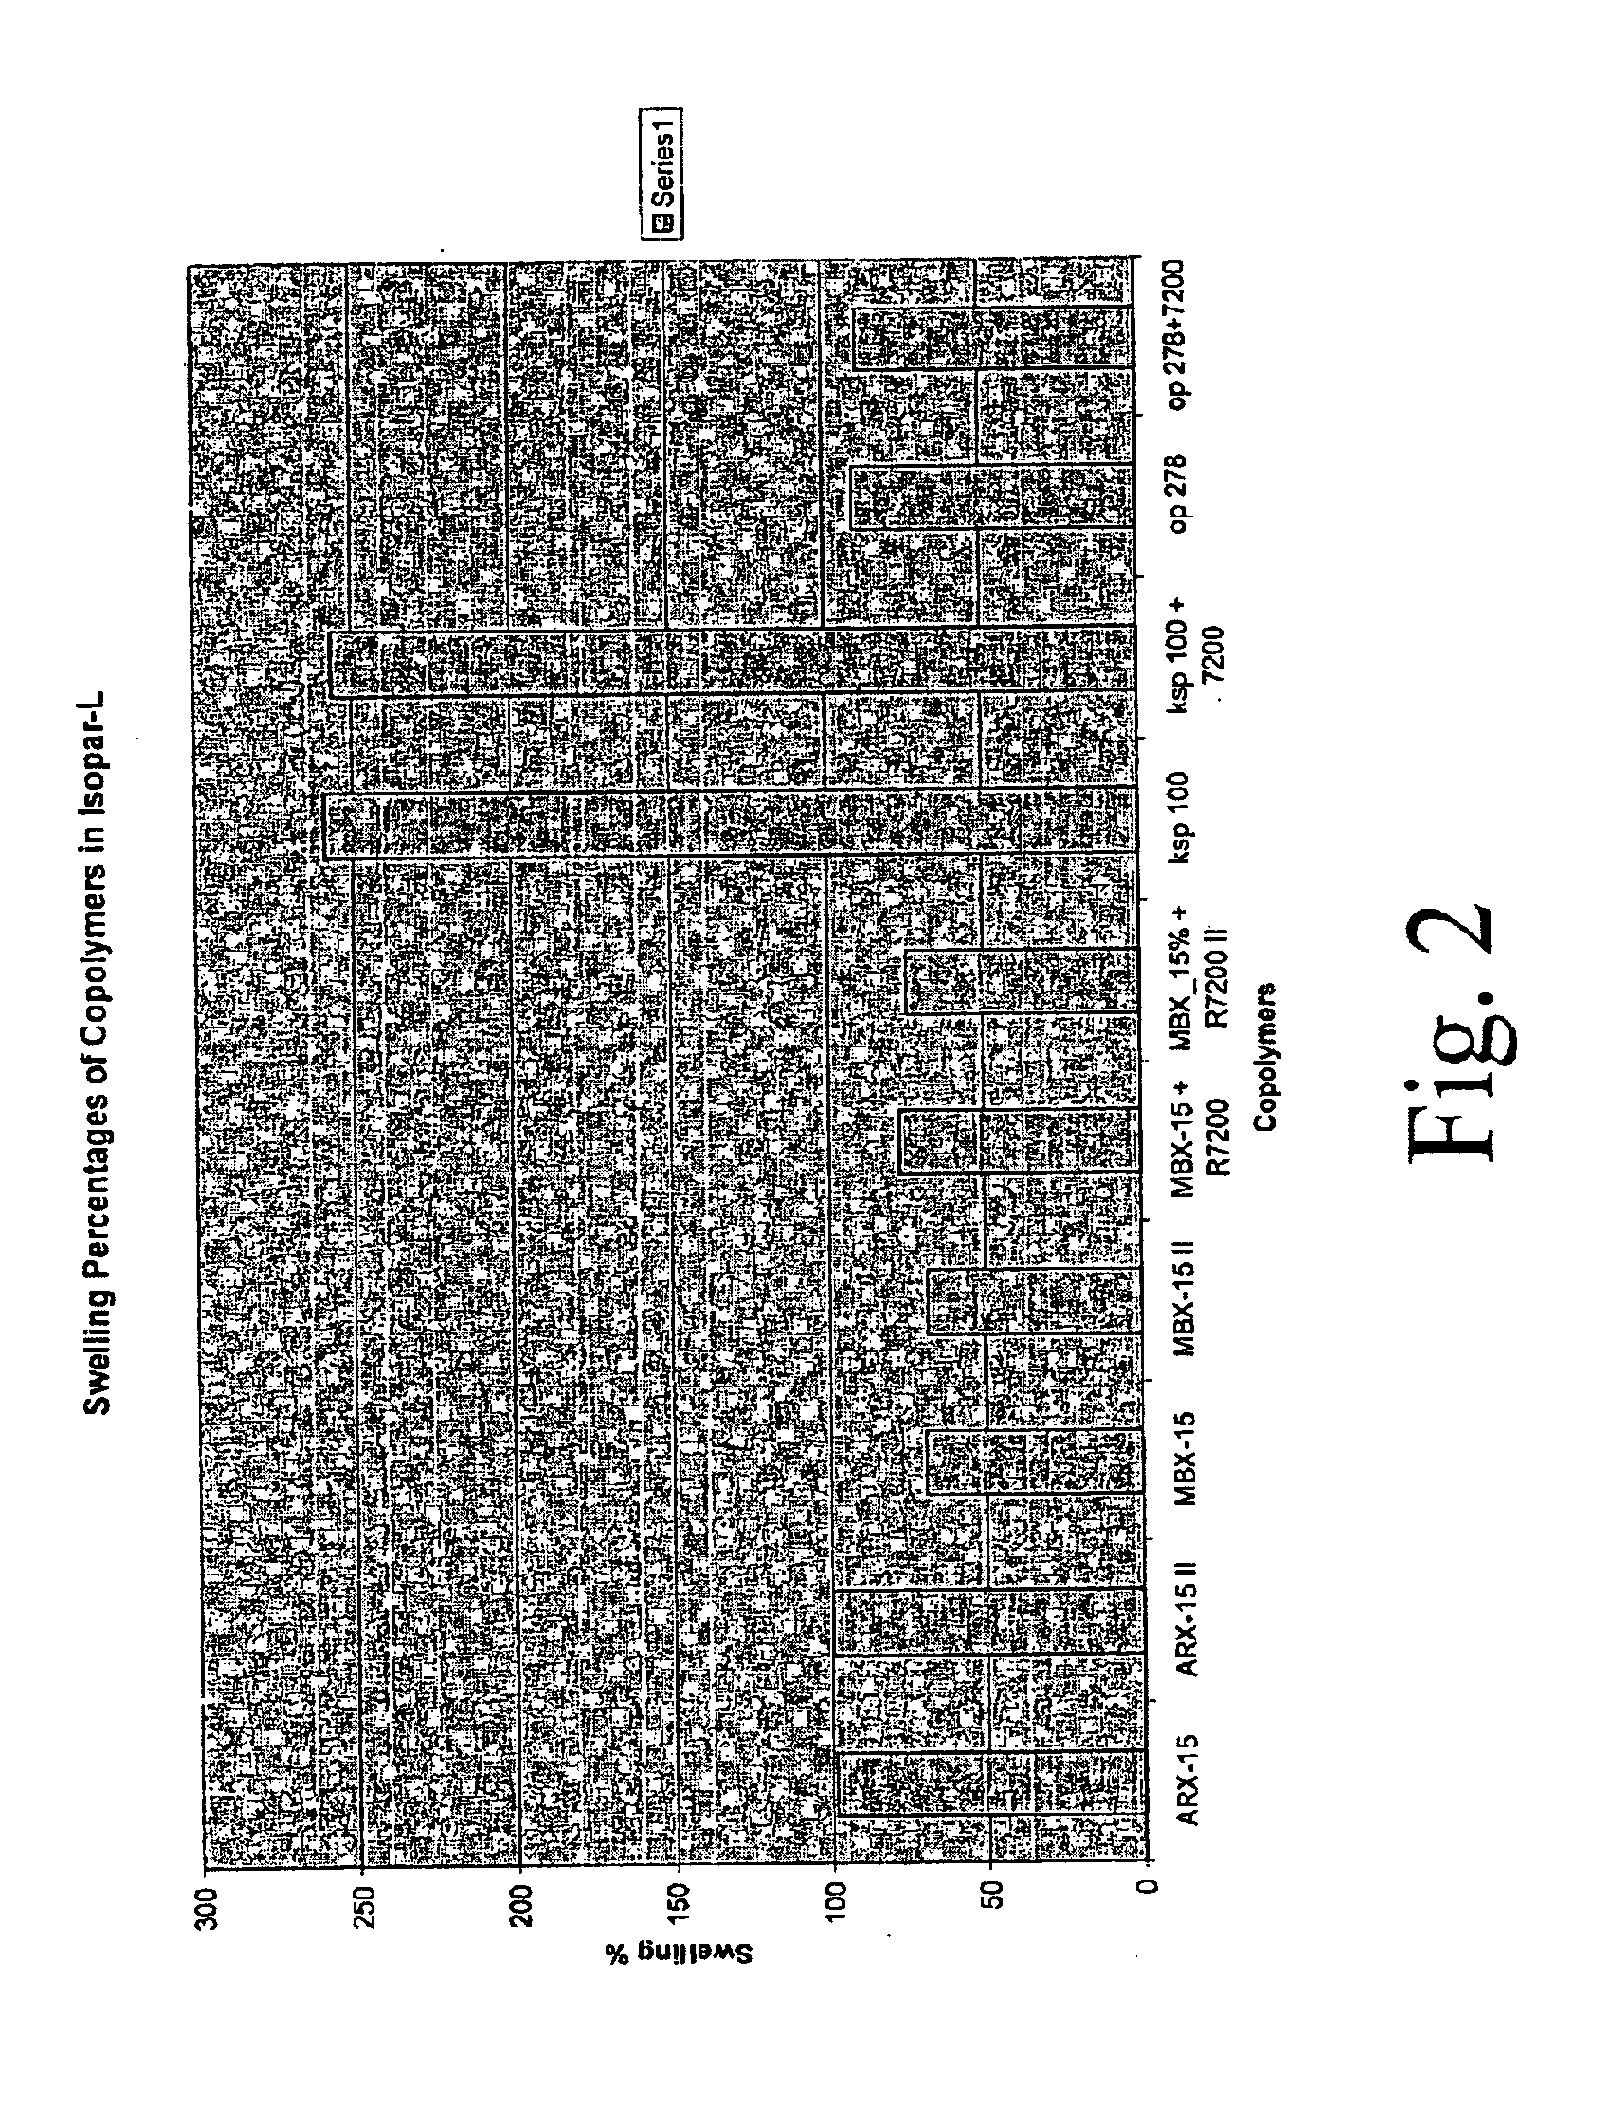 Toner compositions for decreasing background development in liquid electrostatic printing and methods for making and using same